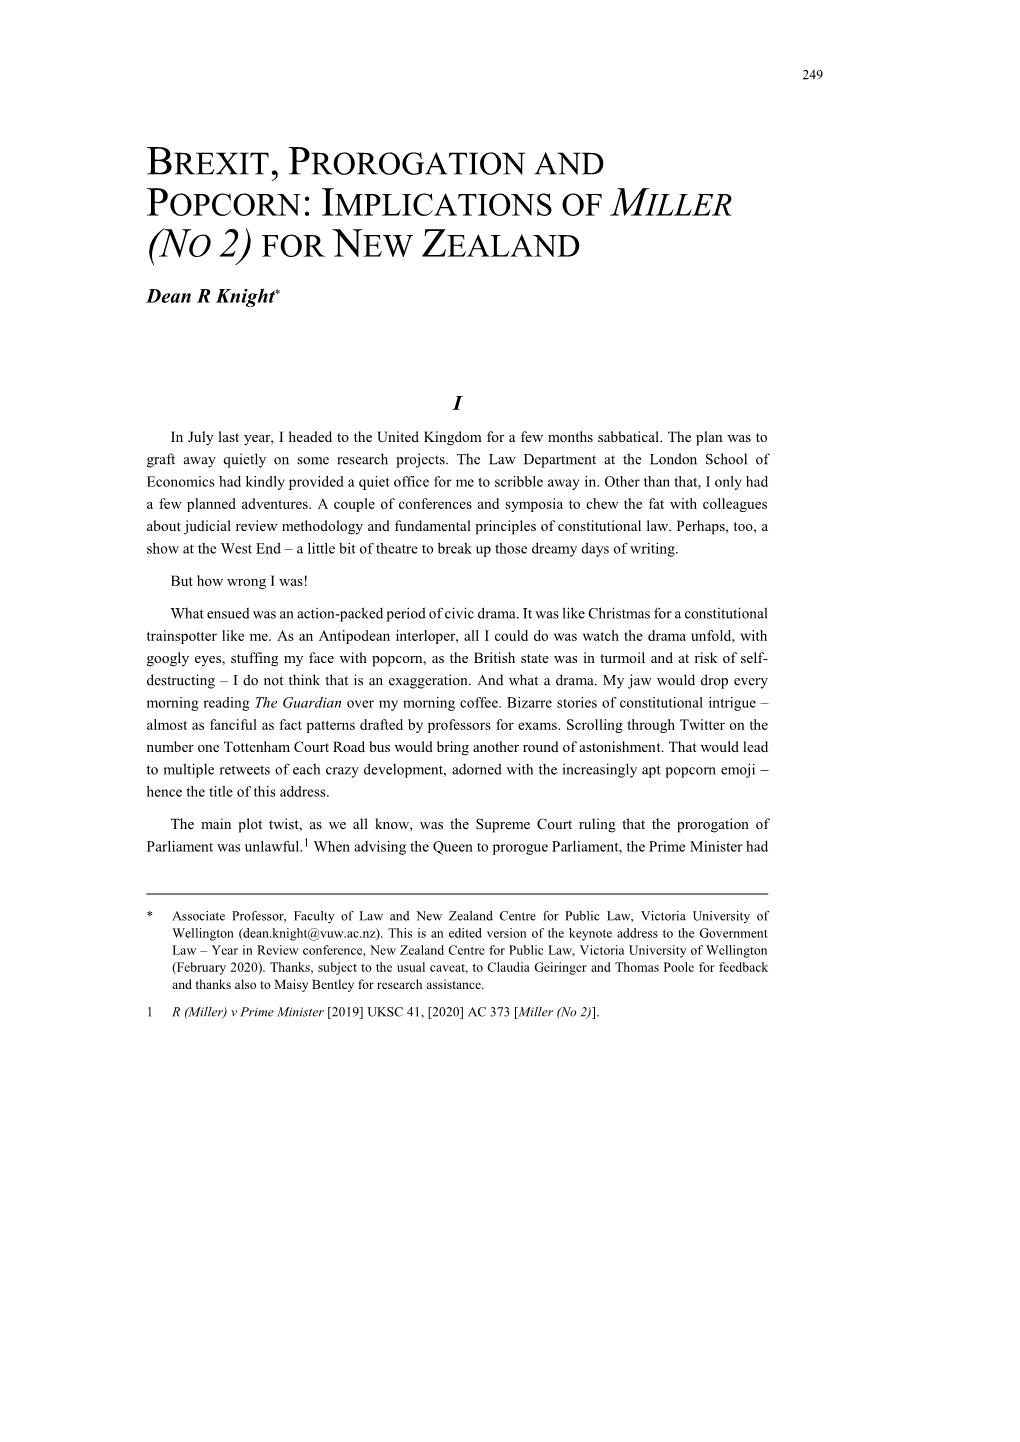 Brexit, Prorogation and Popcorn: Implications of Miller (No 2) for New Zealand